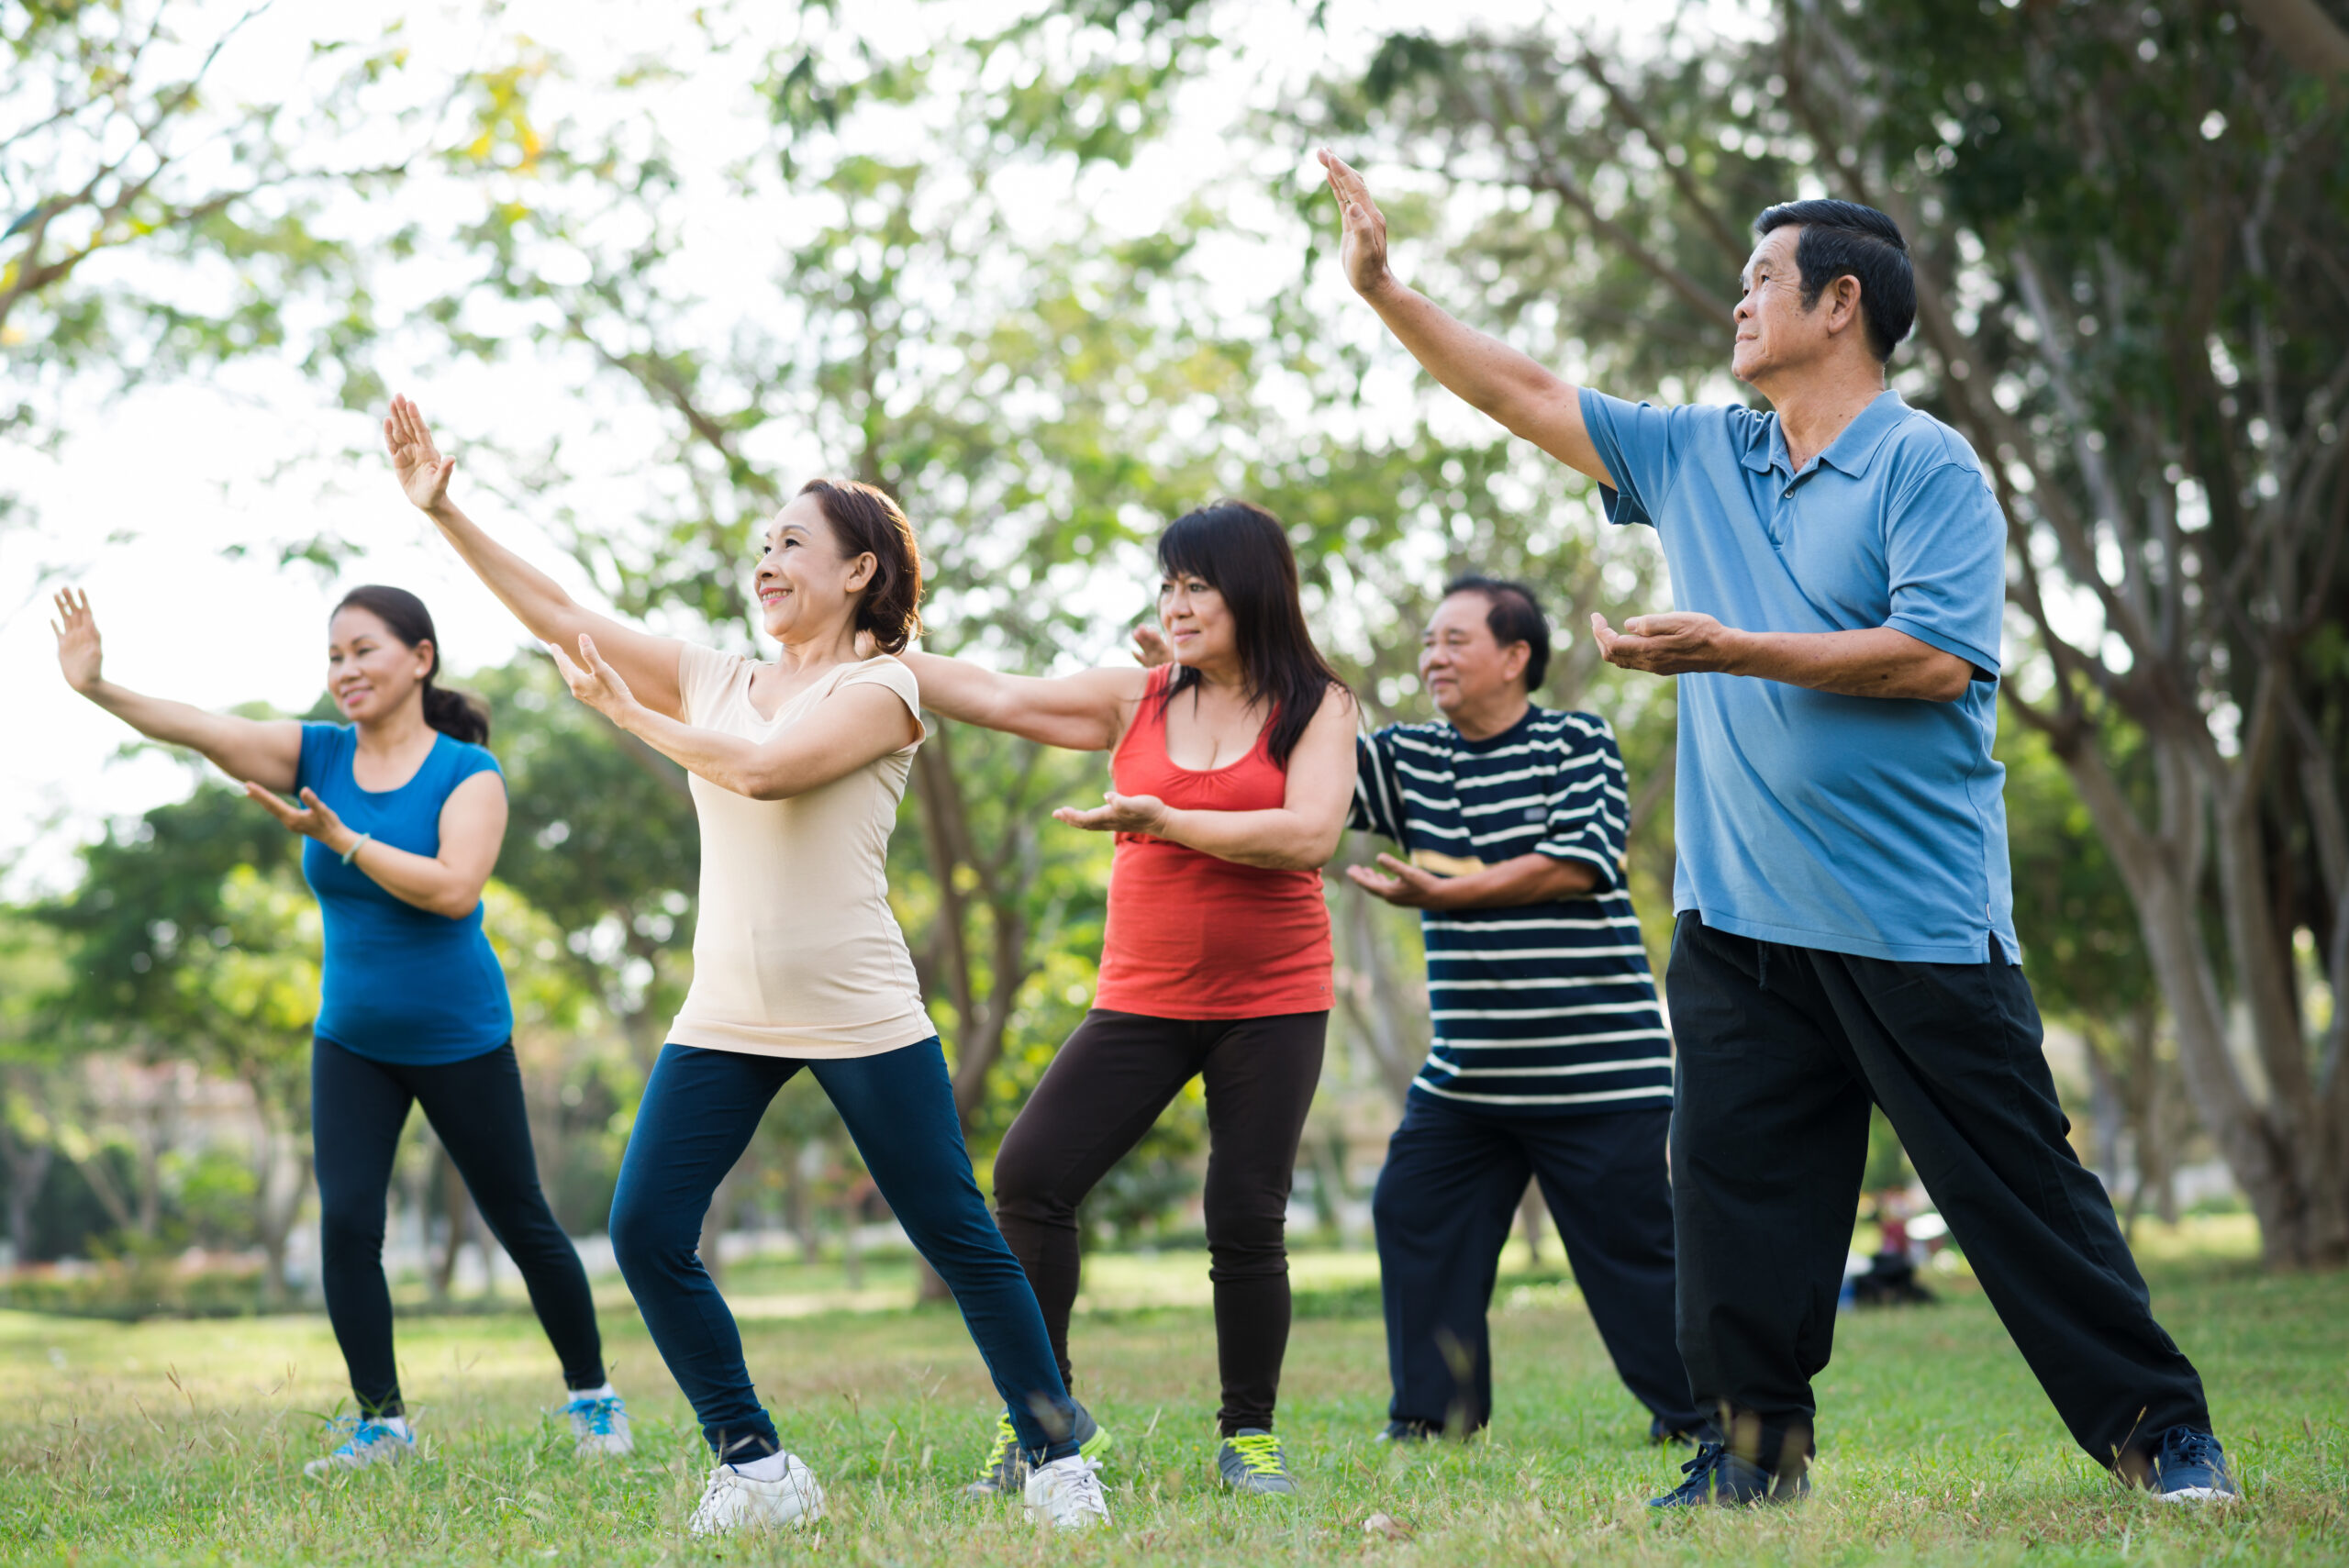 The Moving Meditation: A Tai Chi Journey Begins with One Step